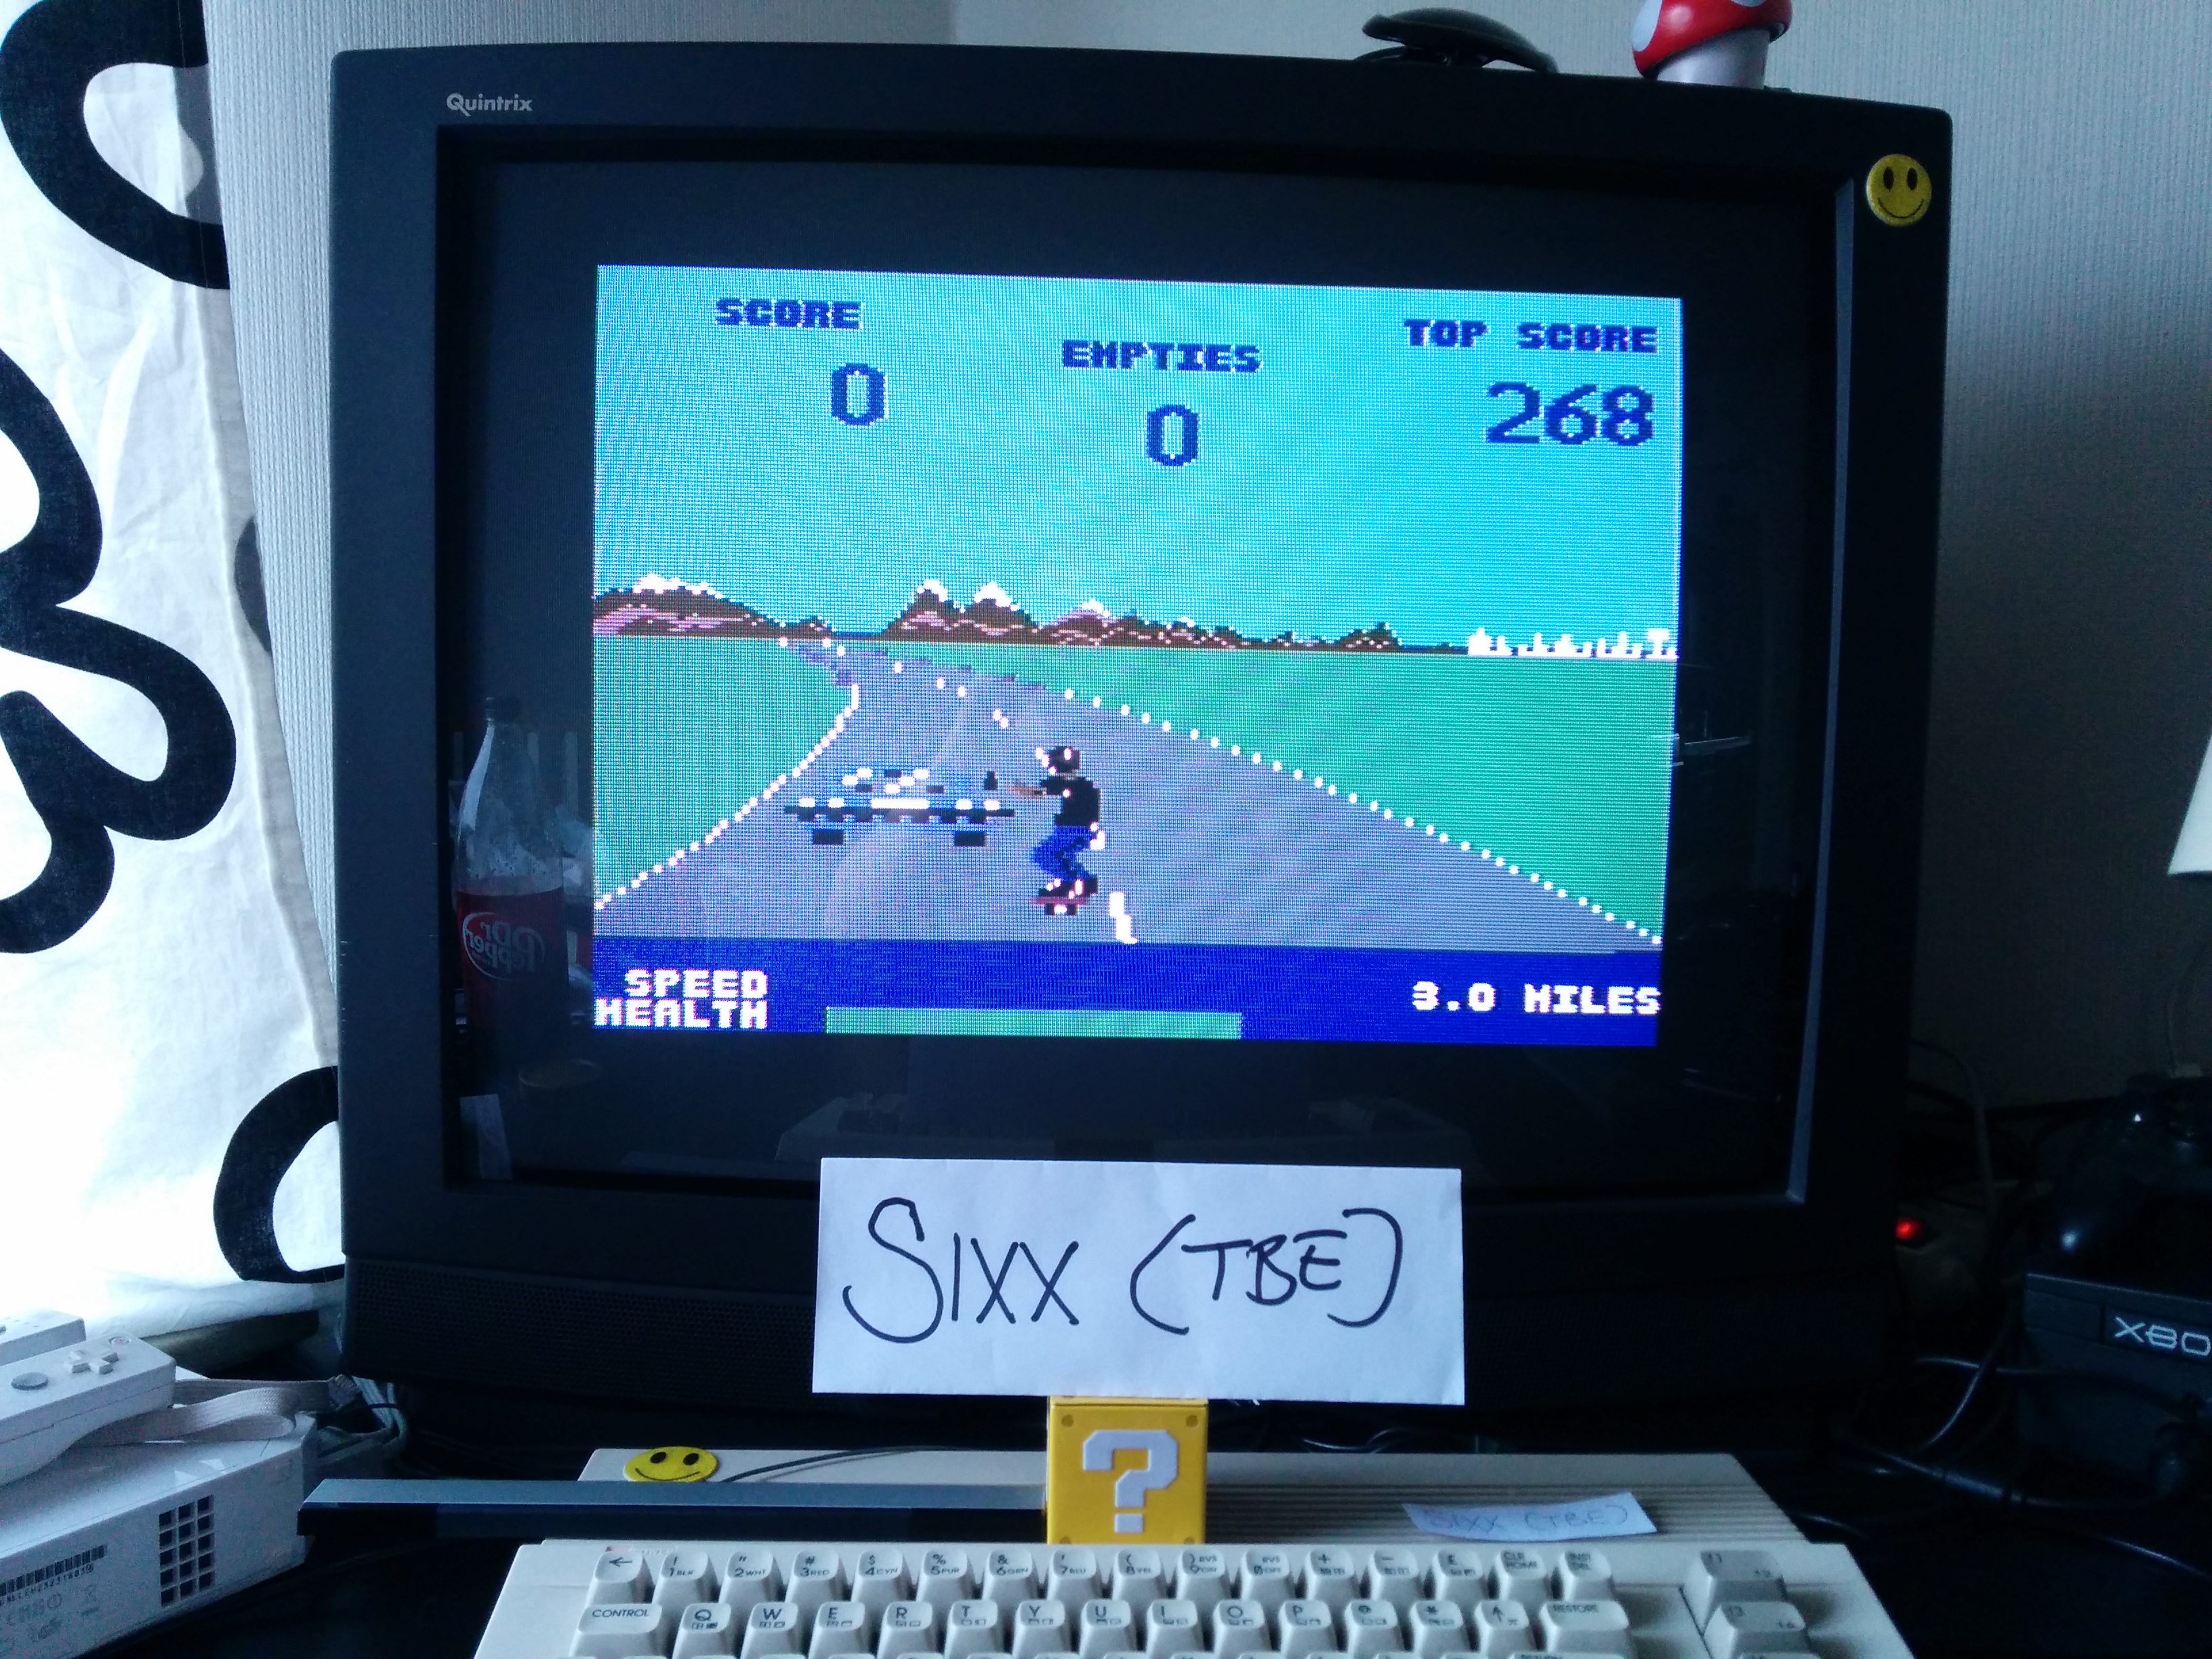 Sixx: Street Surfer (Commodore 64) 268 points on 2014-04-05 04:14:03